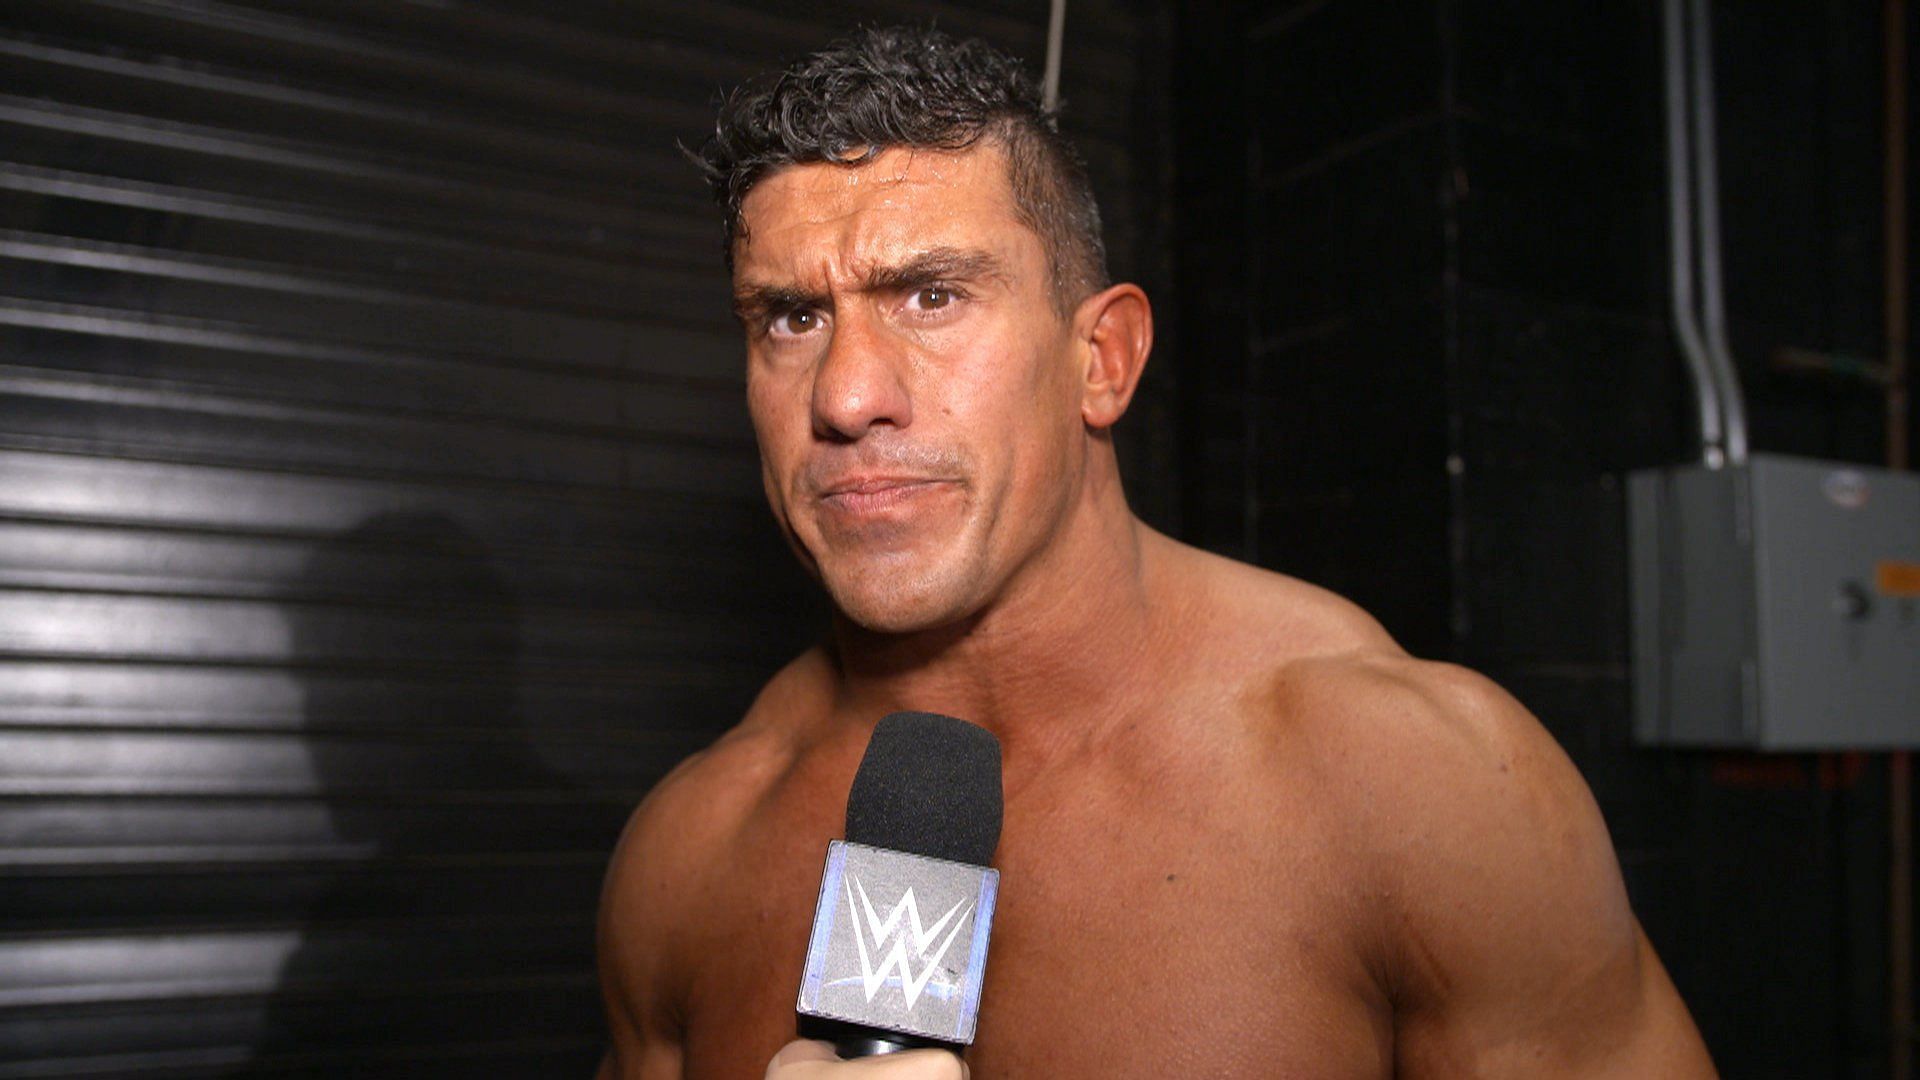 EC3 worked for WWE between 2009-2013 and 2018-2020